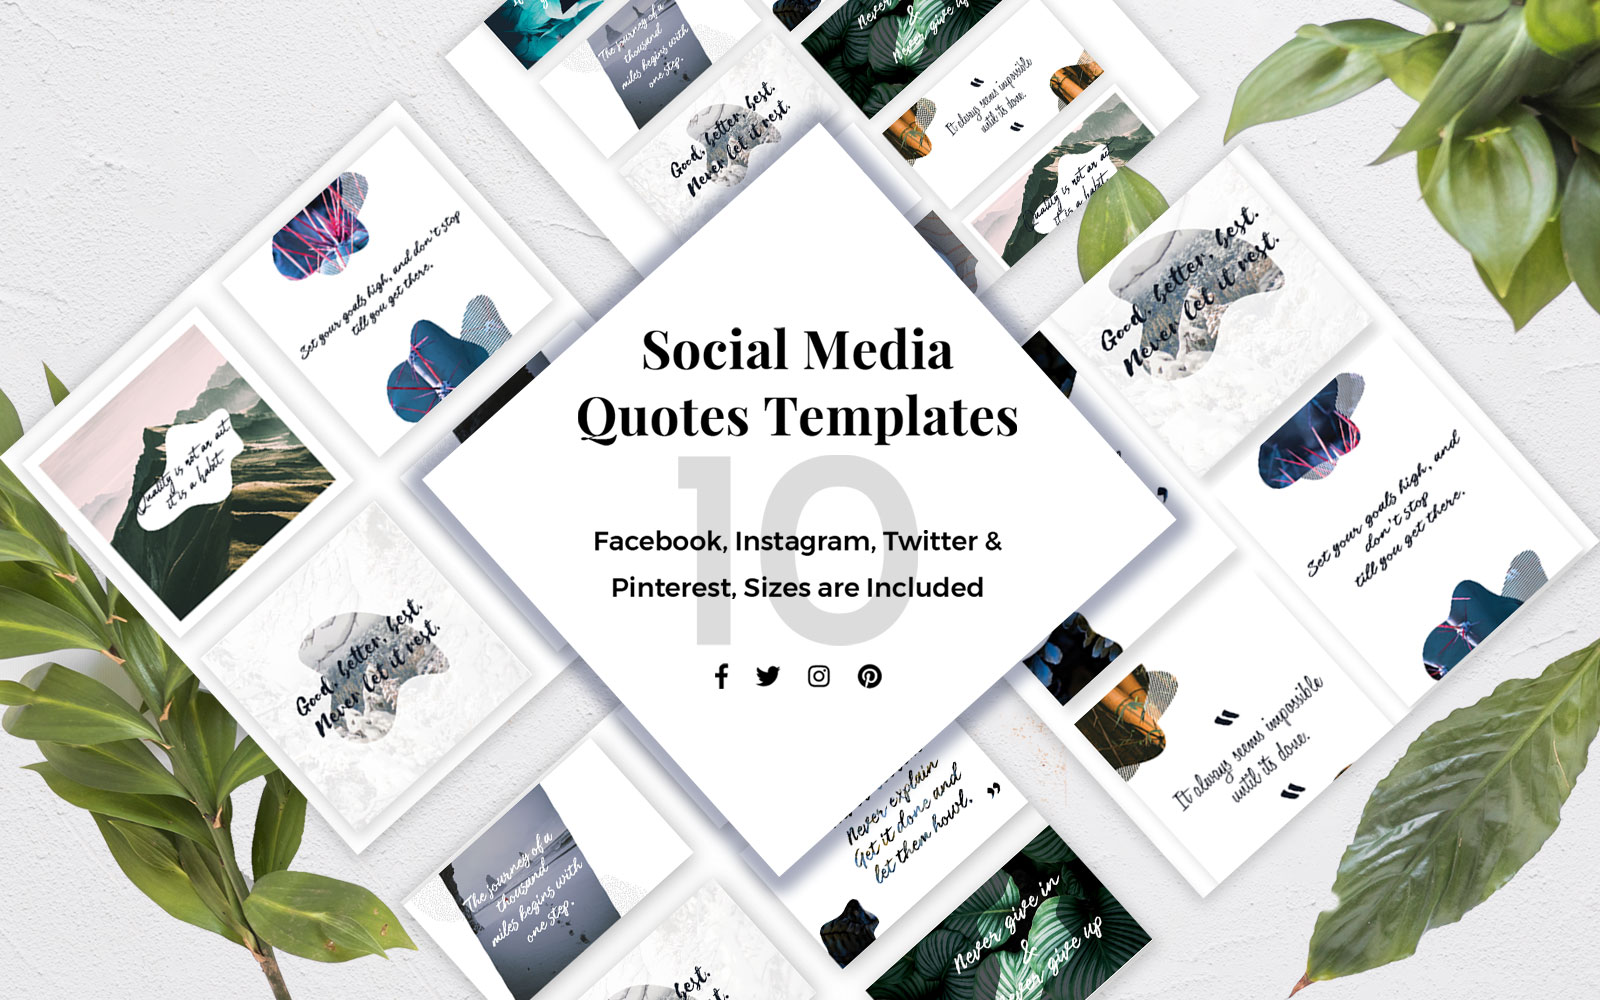 Quotes Trendy Templates for Social Media